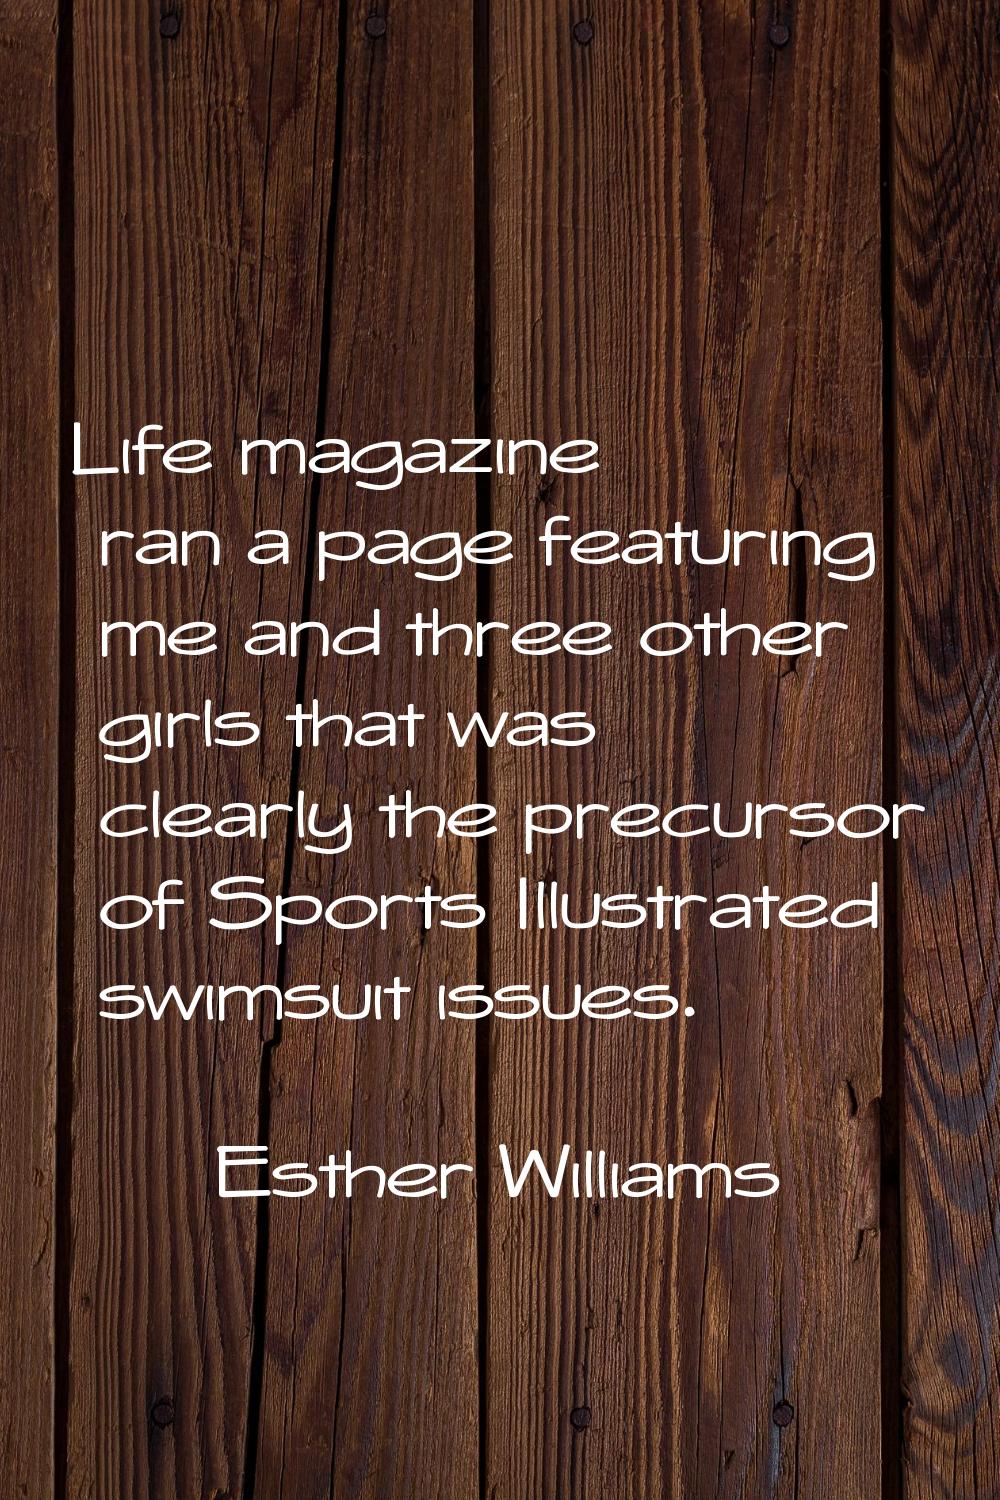 Life magazine ran a page featuring me and three other girls that was clearly the precursor of Sport